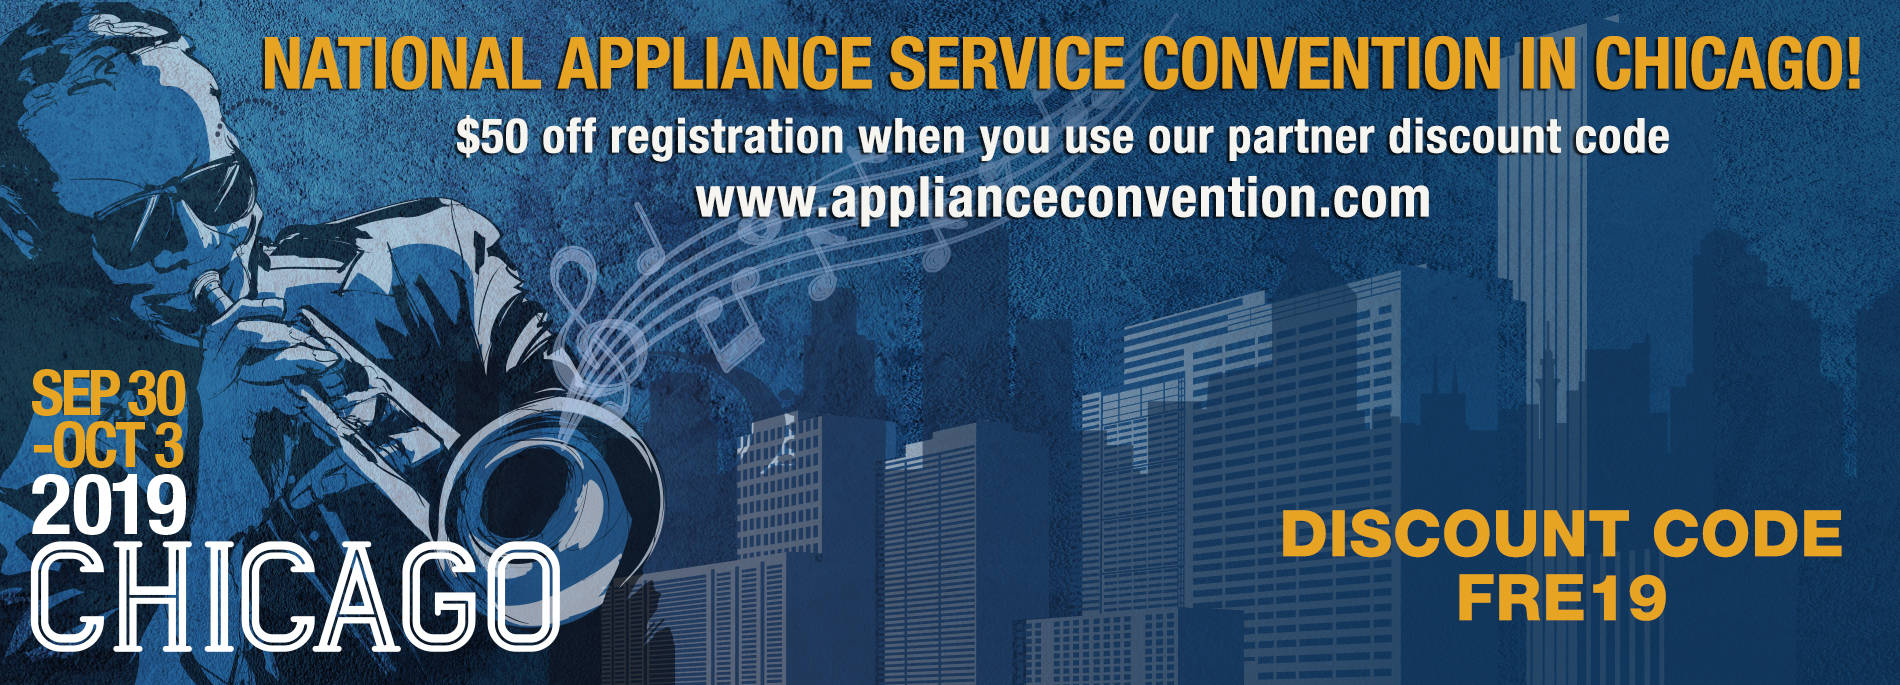 National Appliance Service Convention